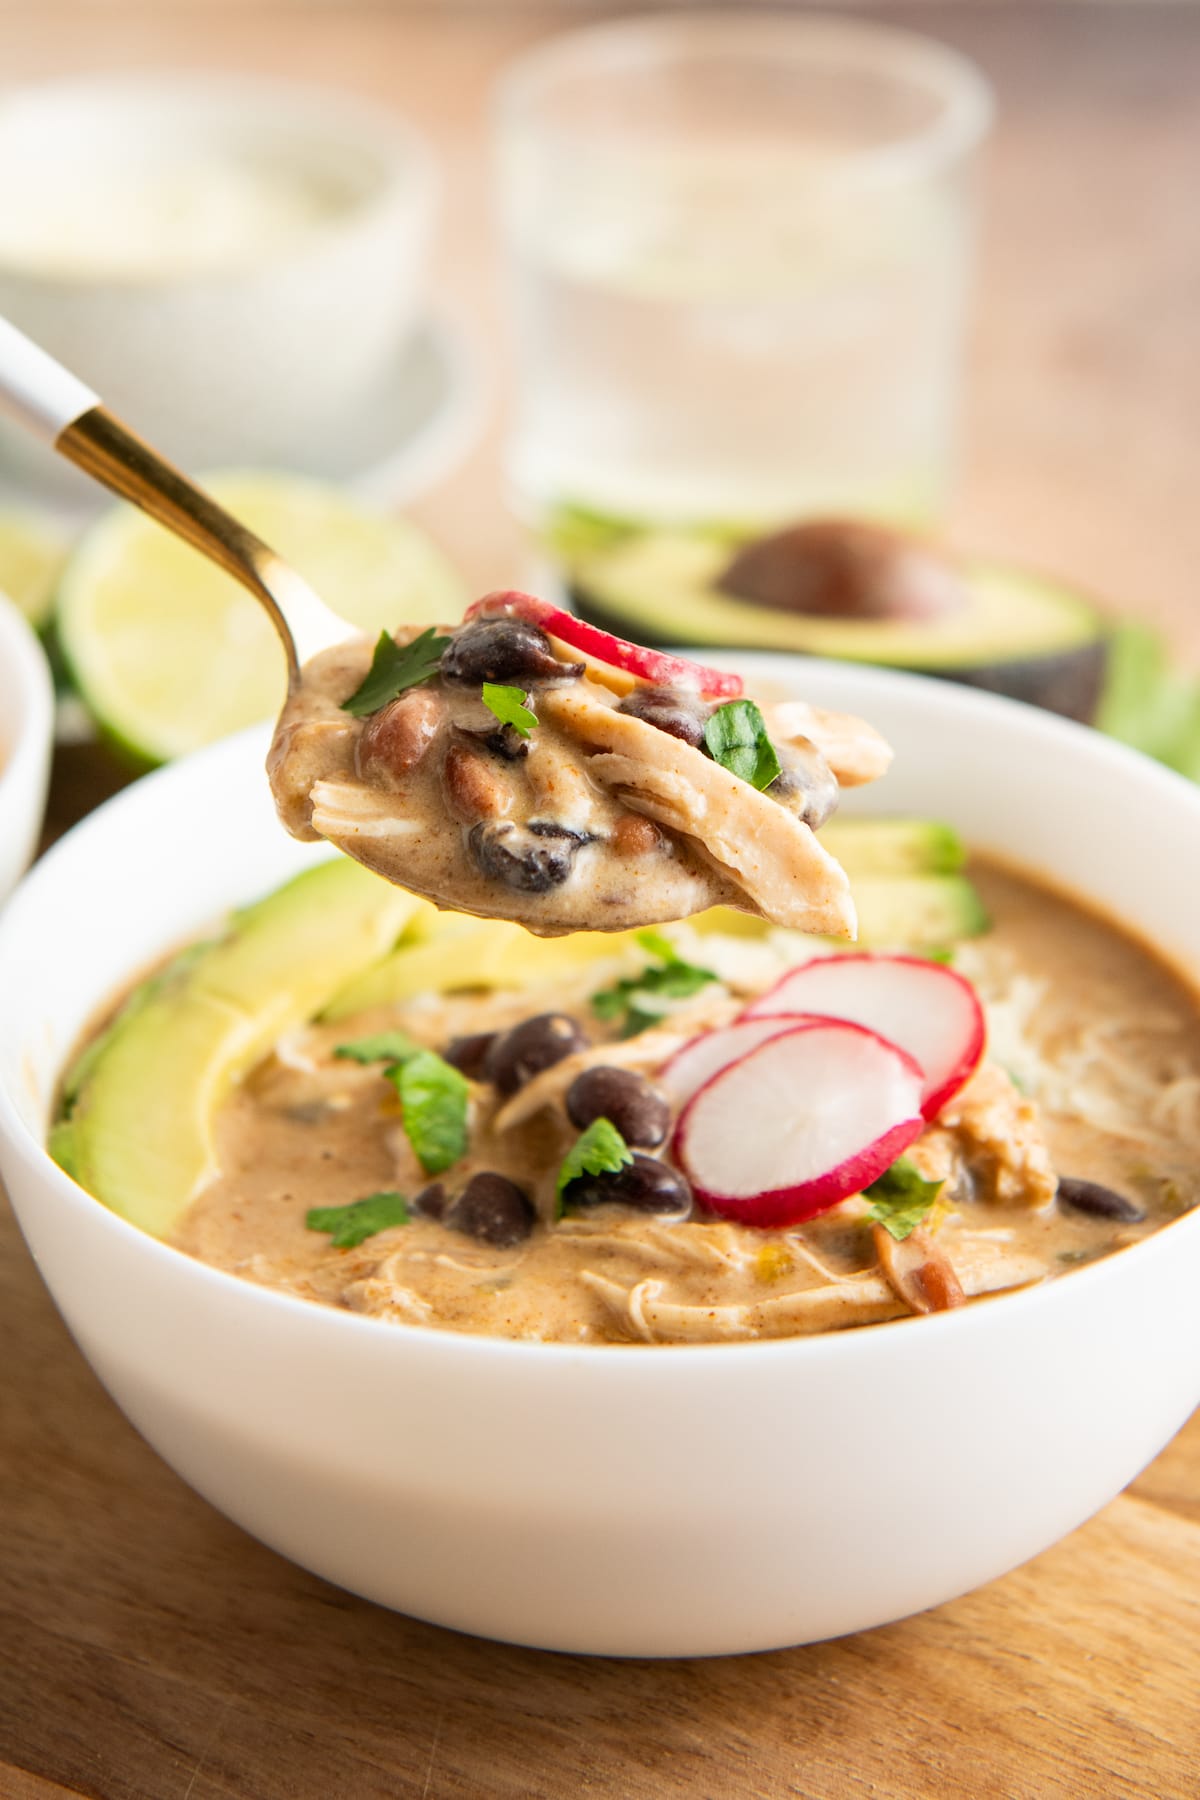 A spoon with a spoonful of soup in it, above a bowl of chicken enchilada soup topped with radishes and avocado, with a glass of water and half an avocado in the background.